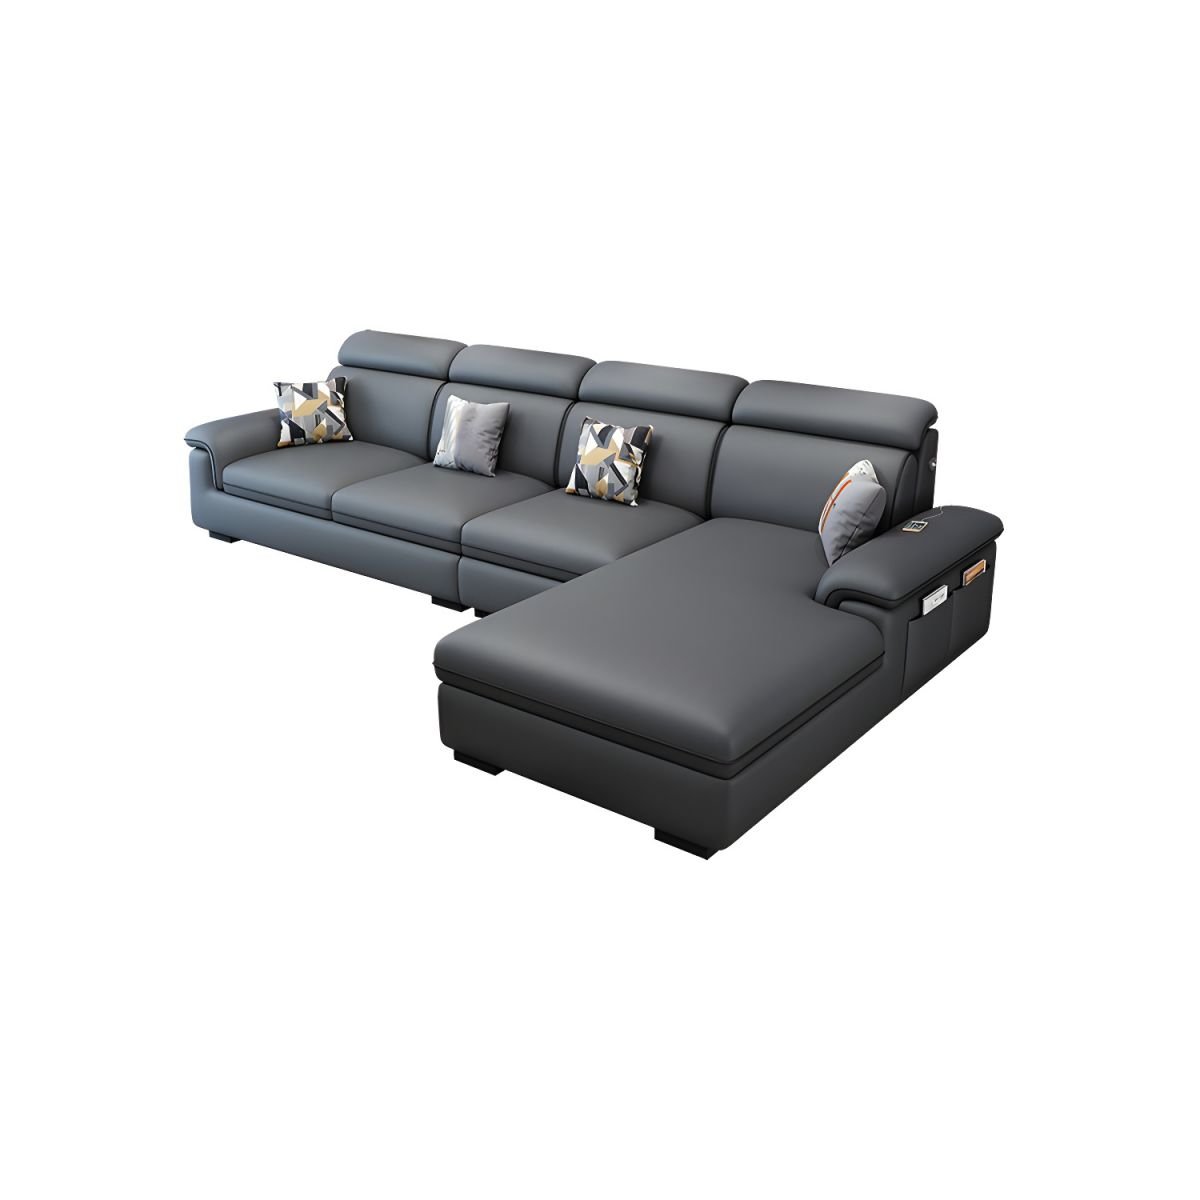 Wooden Modern 9 Feet L-Shape Sectionals No Distressing Seats 4 Storage Included Sofa Chaise - Tech Cloth Dark Gray Right